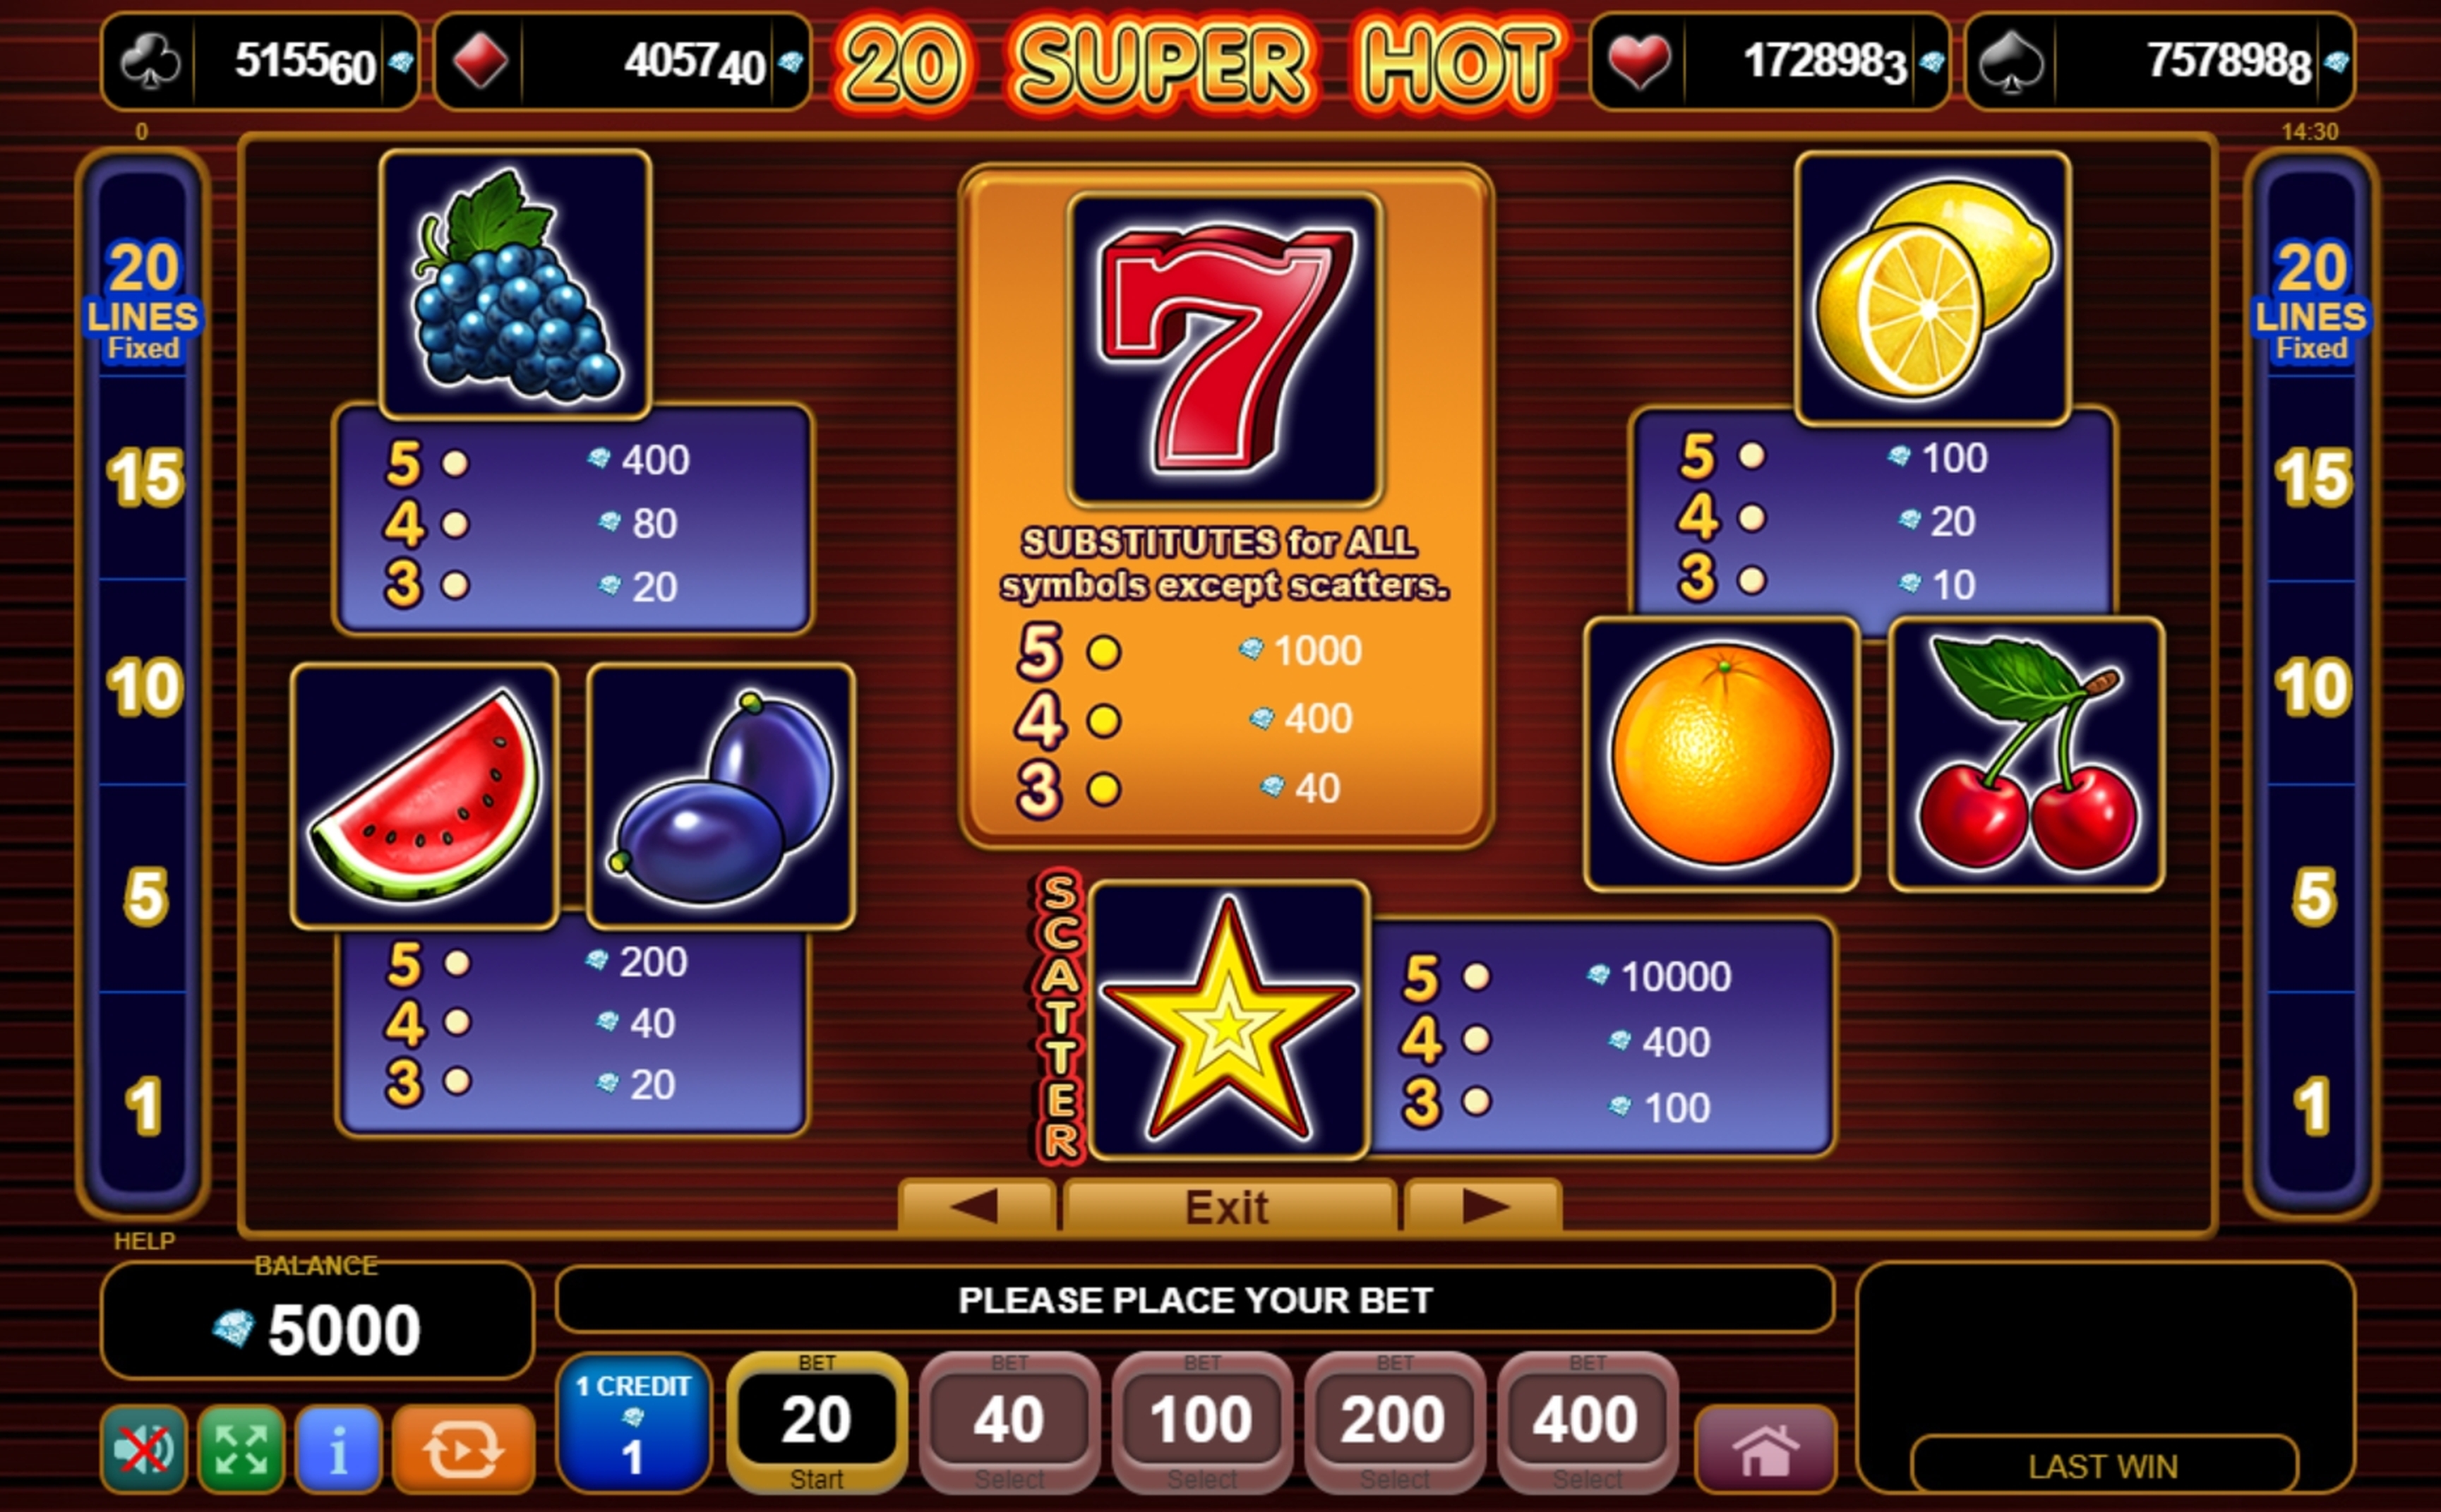 Info of 20 Super Hot Slot Game by EGT